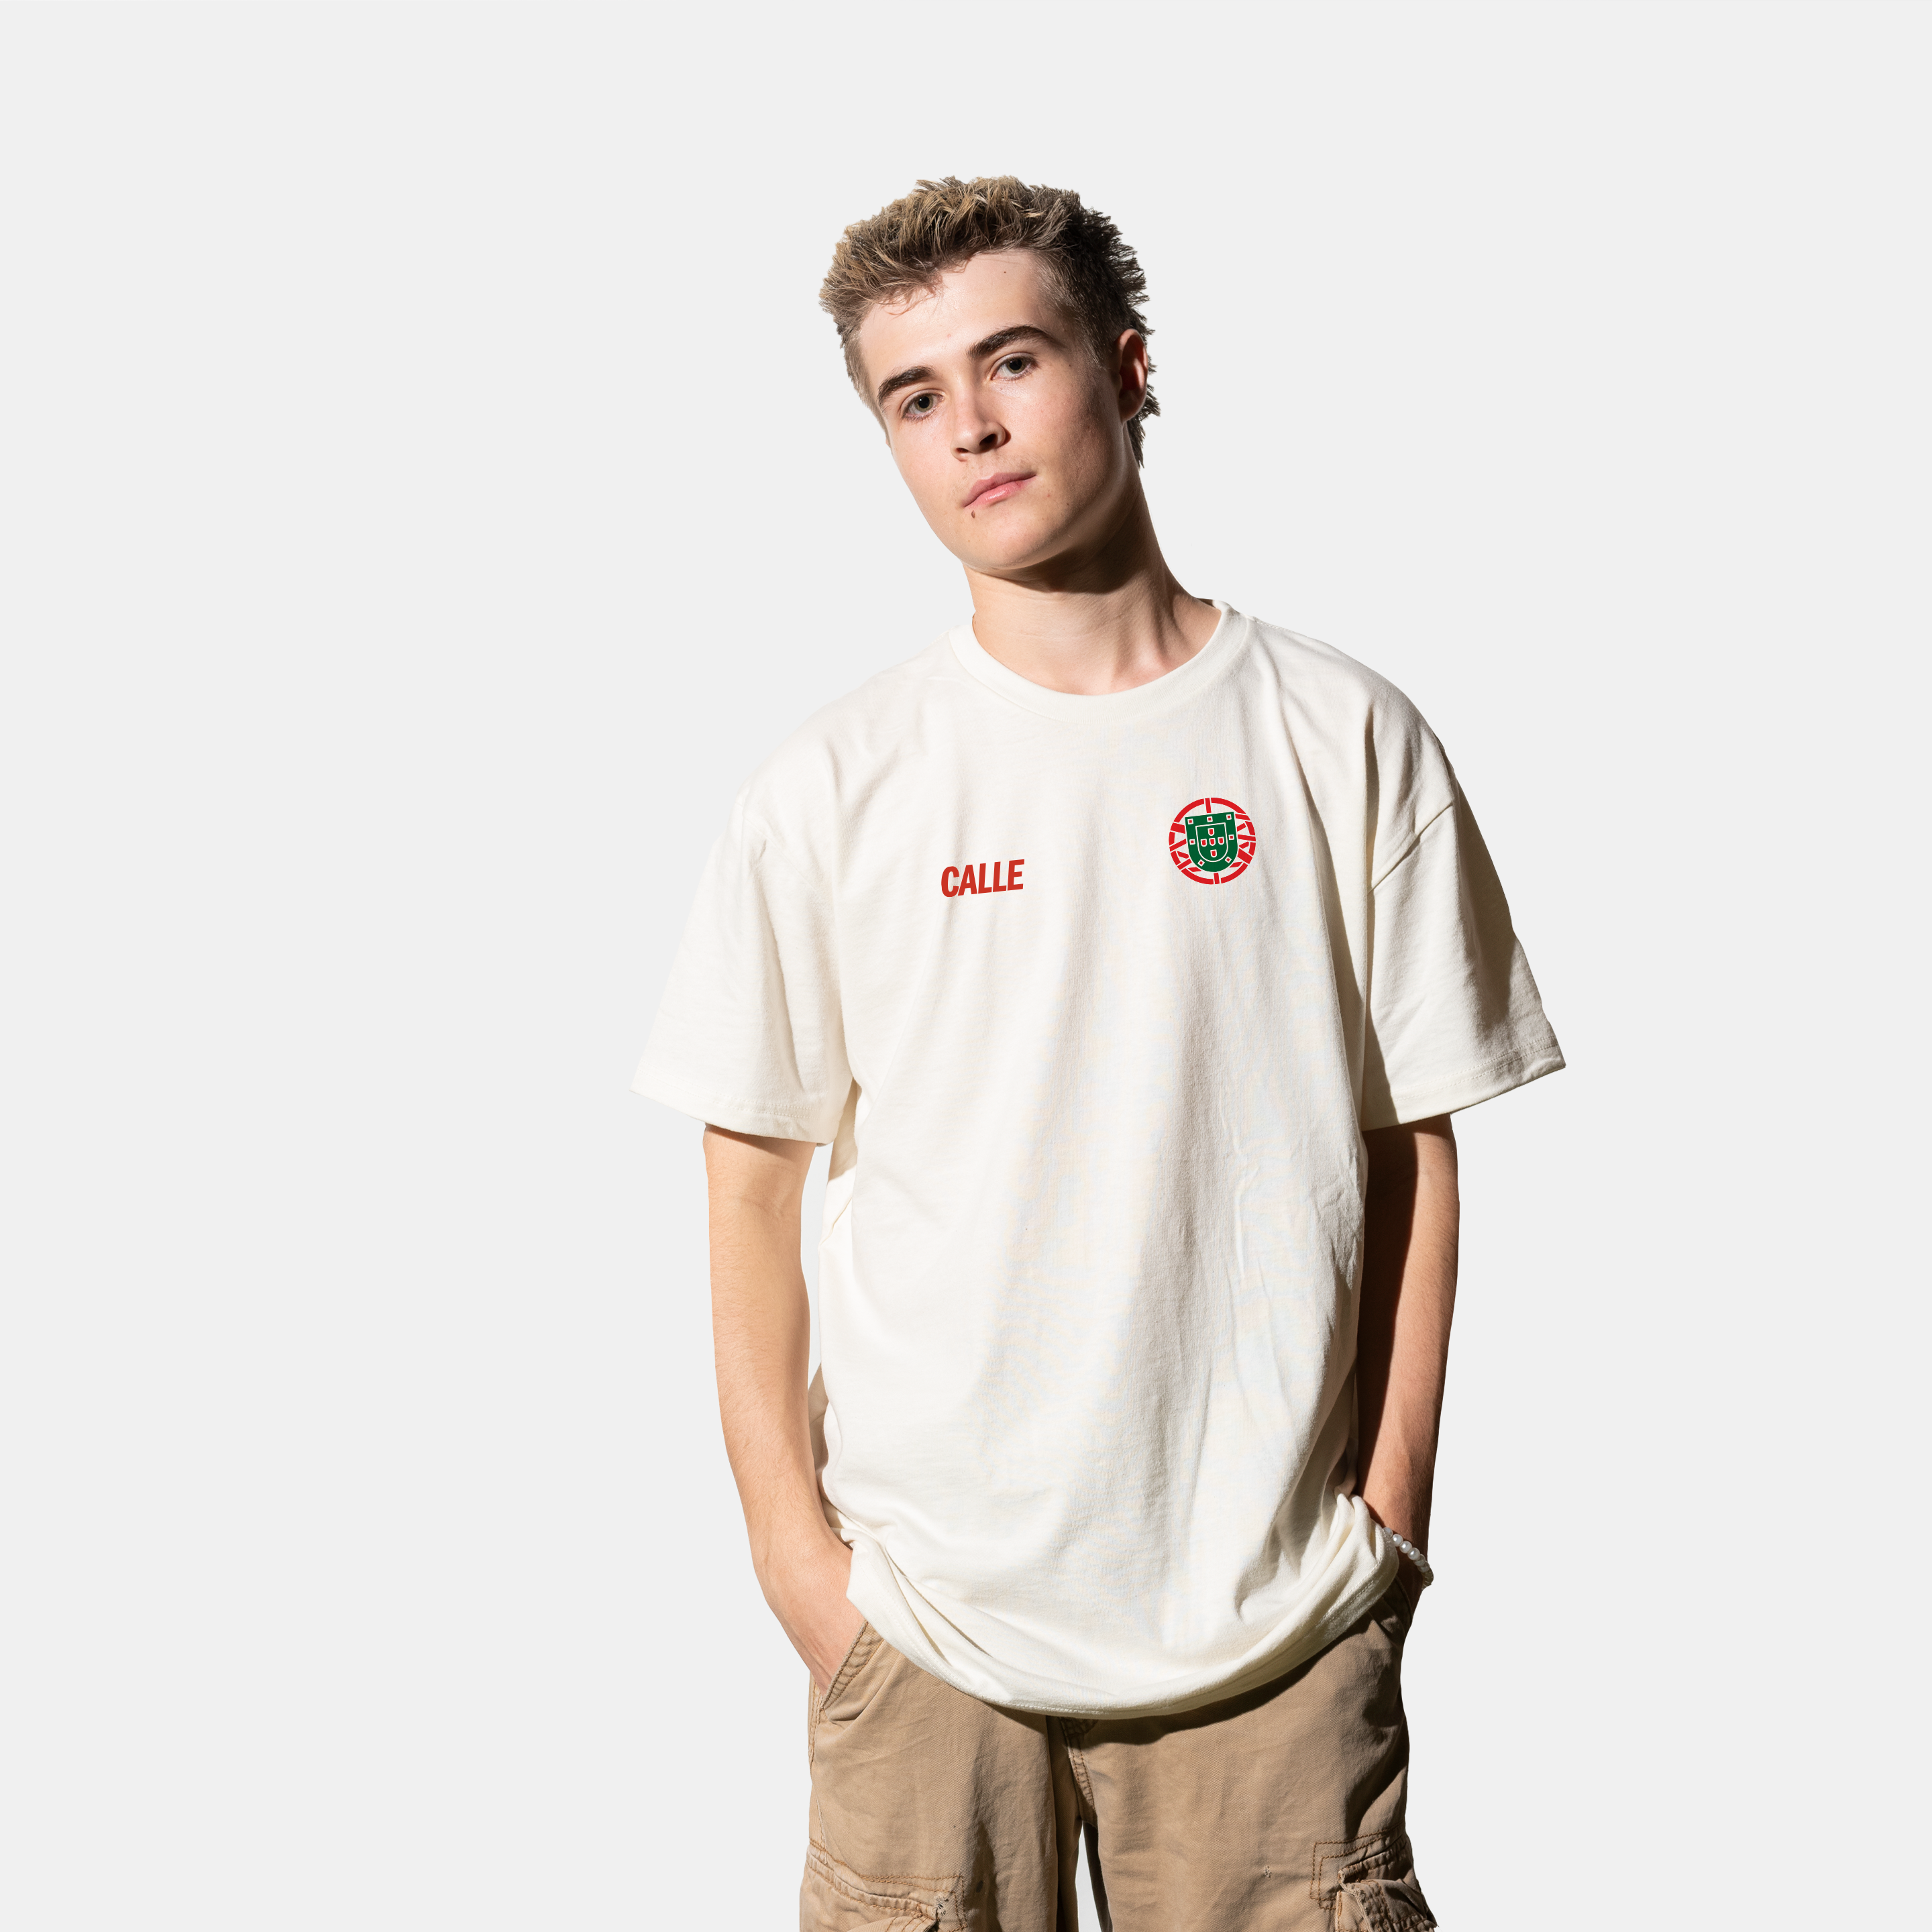 "Unofficial" Portugal Tee